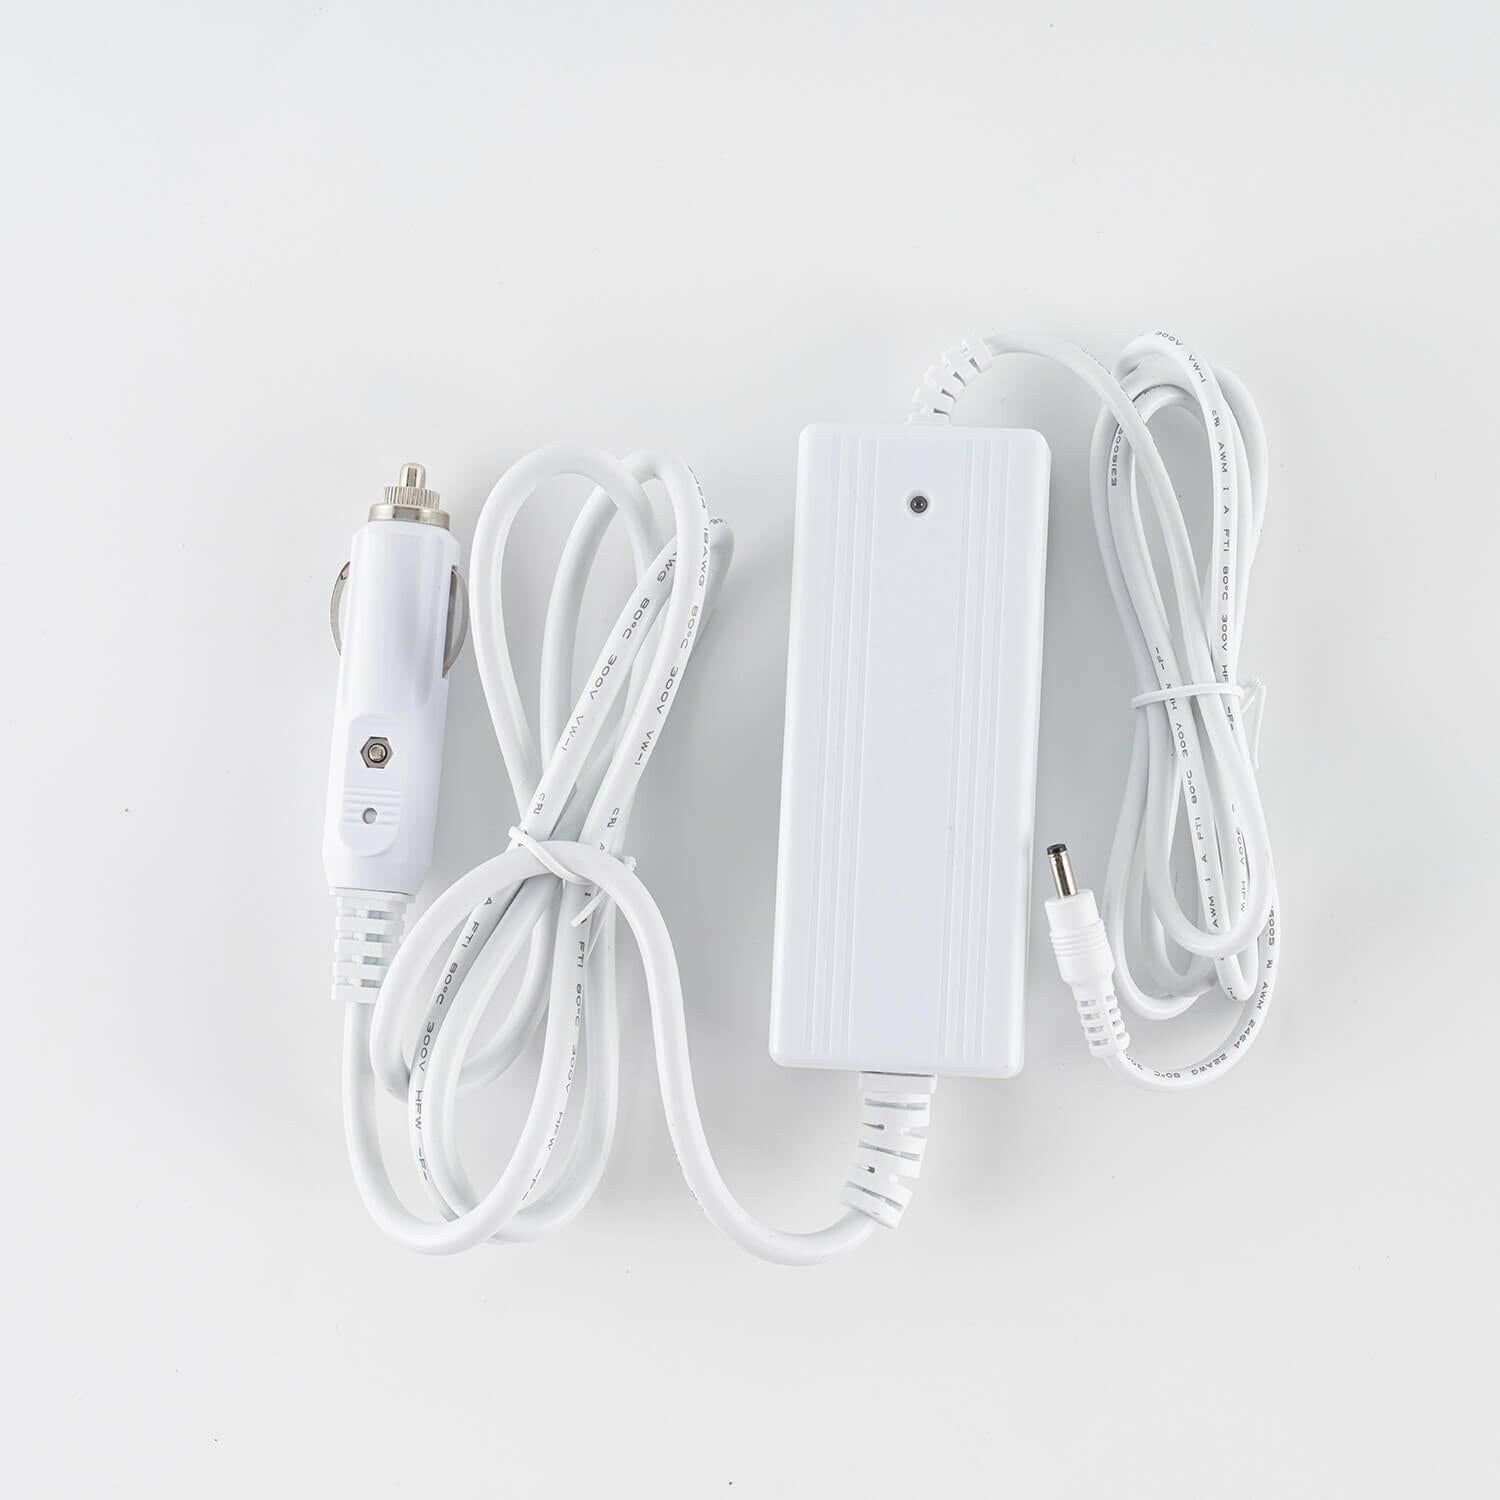 Replacement Power Cord for Cricut Explore Air 2, Malaysia